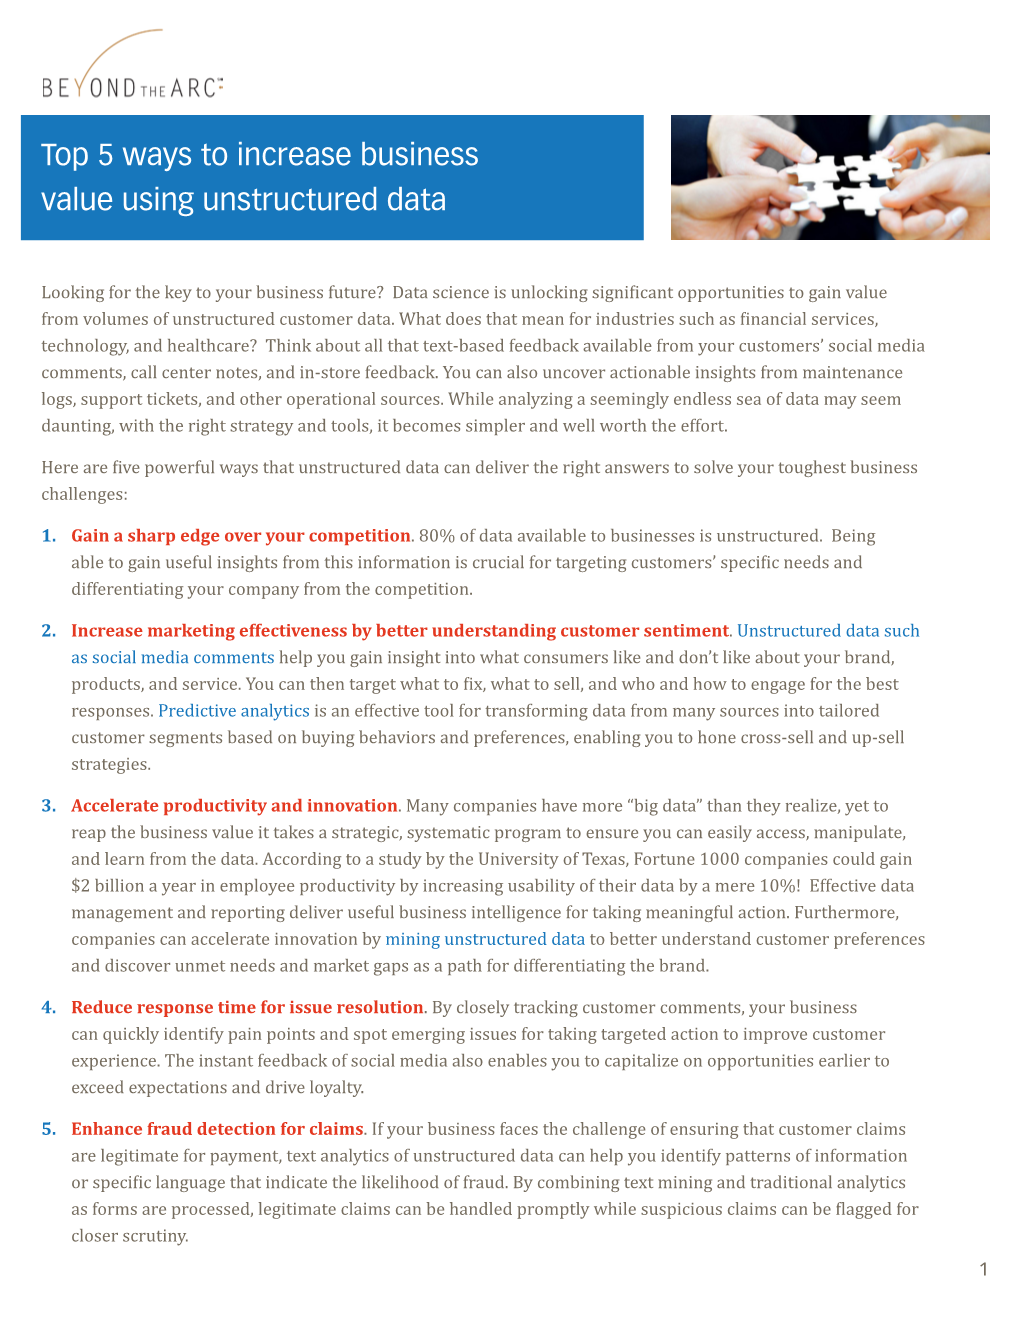 Top 5 Ways to Increase Business Value Using Unstructured Data